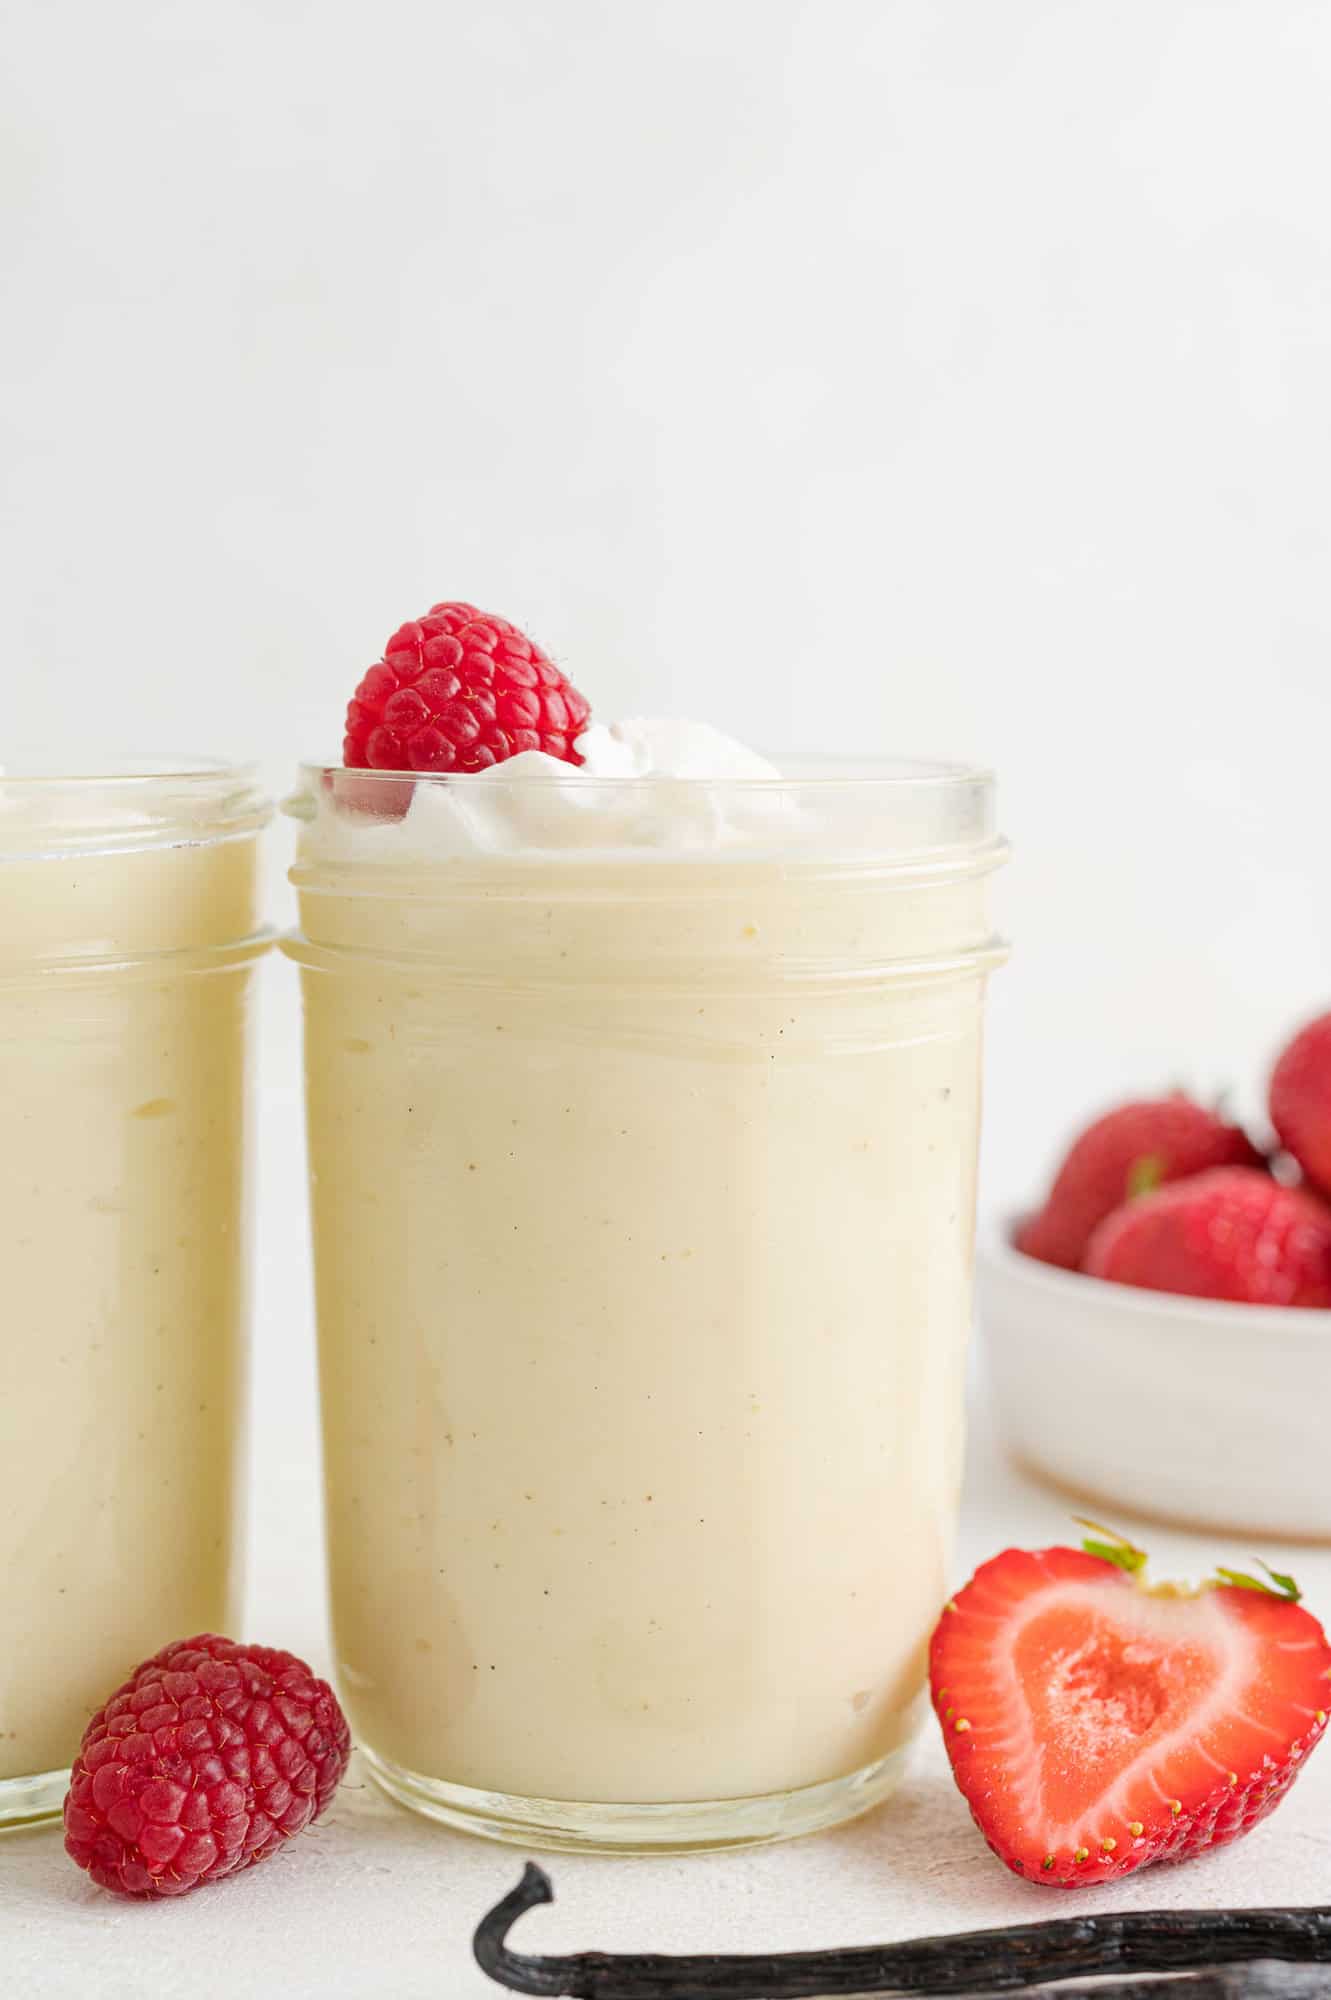 Vanilla pudding in a jar with whipped cream and a strawberry.